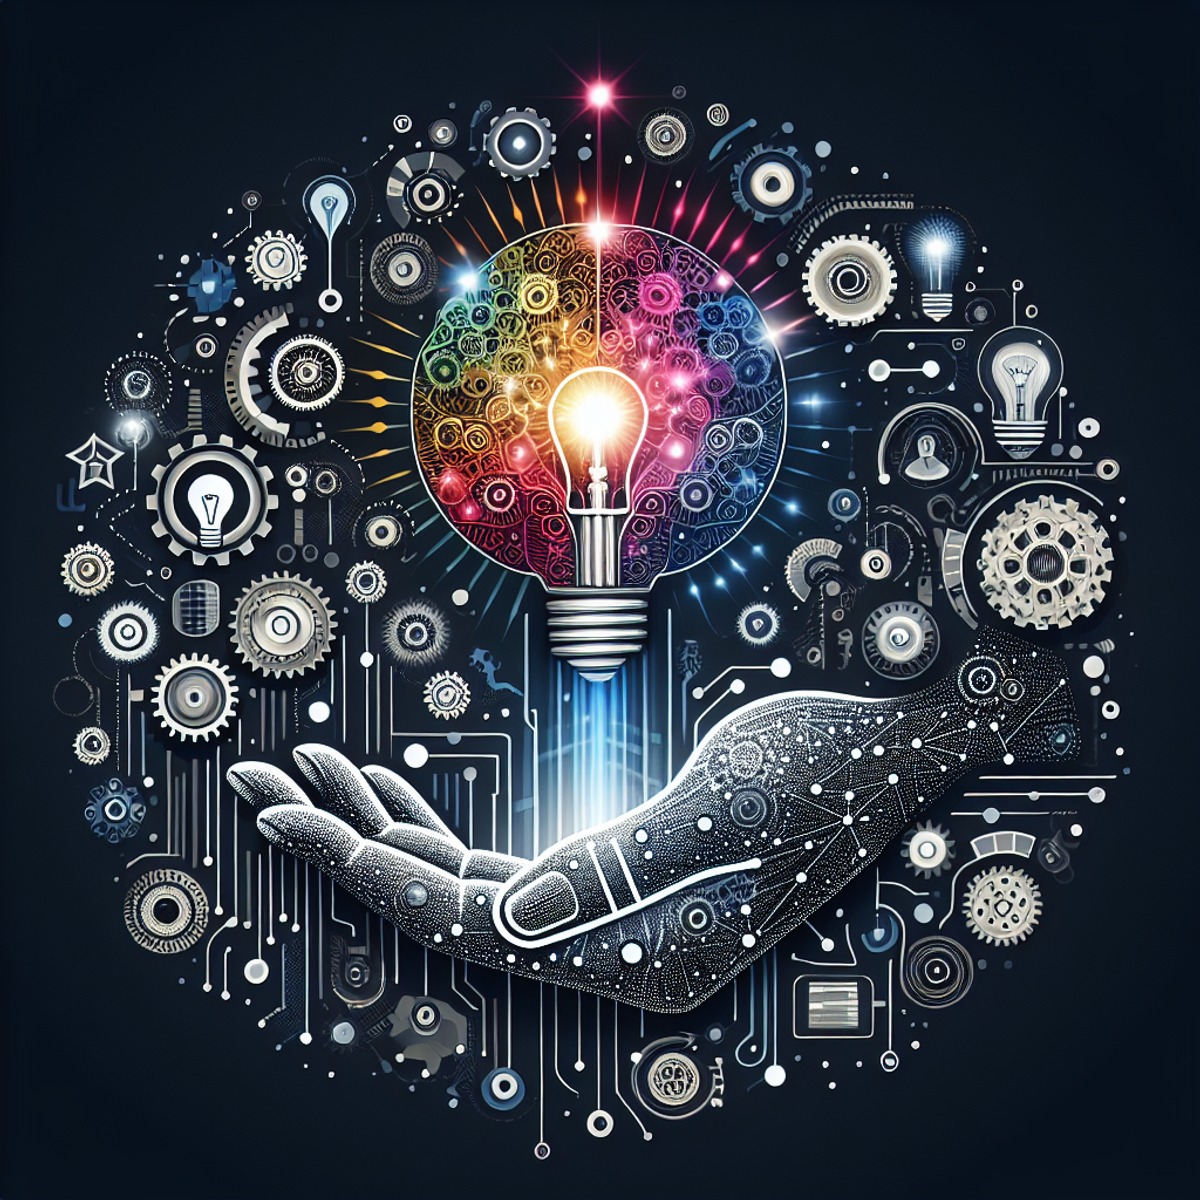 An abstract image featuring gears, light bulbs, a brain, and circuits arranged in a dynamic pattern to symbolize the fusion of creativity and artificial intelligence in content creation.